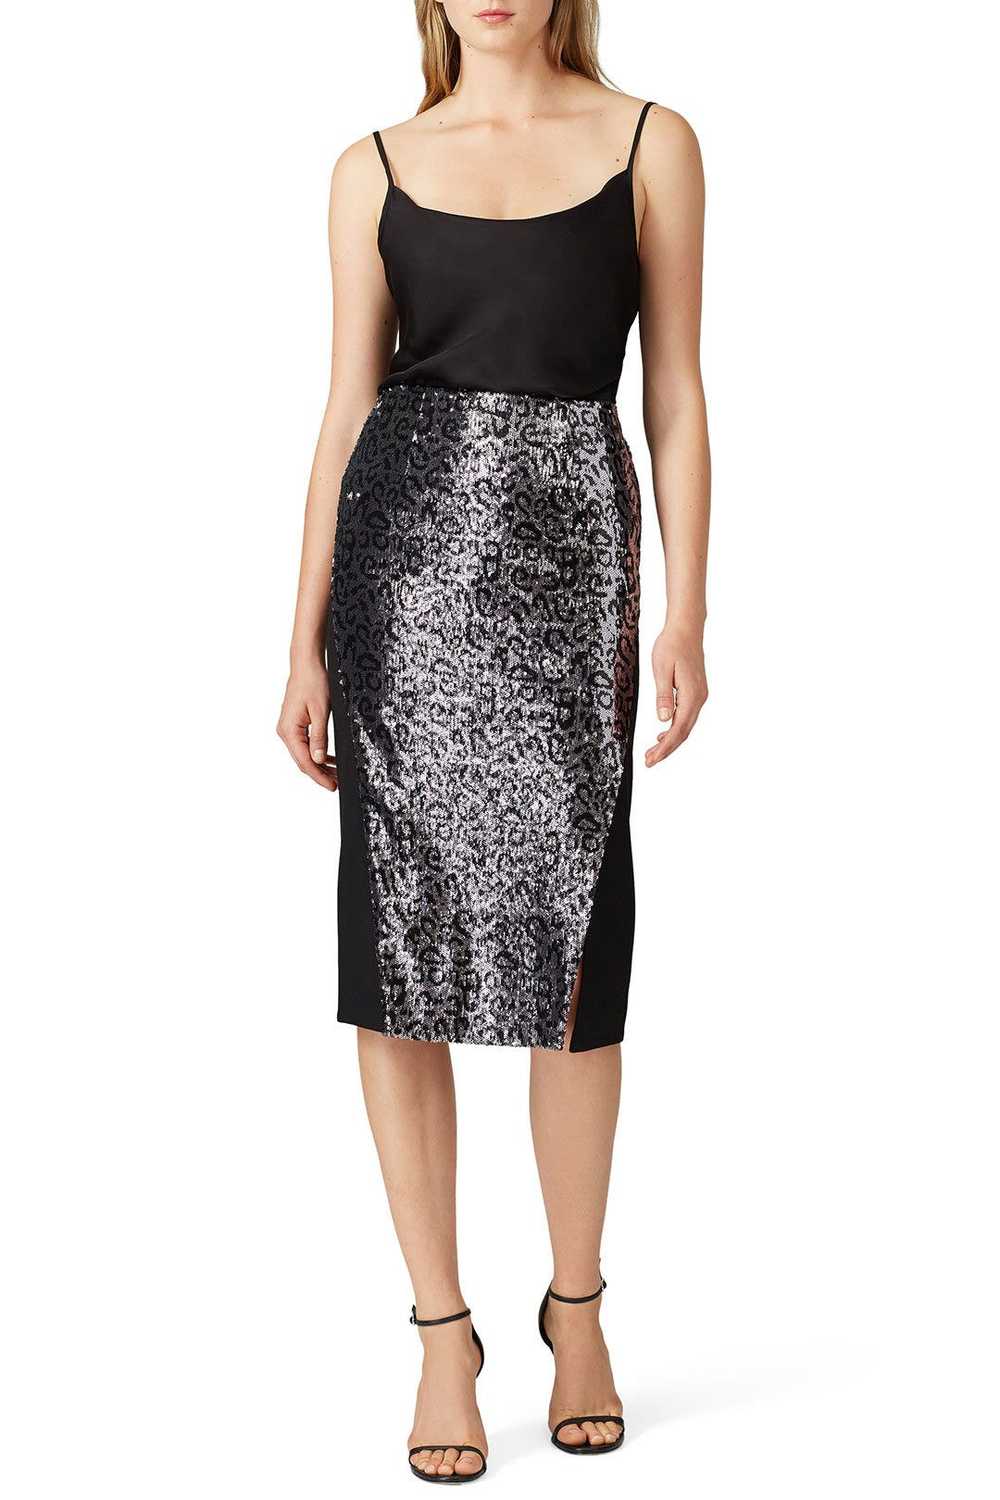 N12H First Row Sequin Skirt - image 1